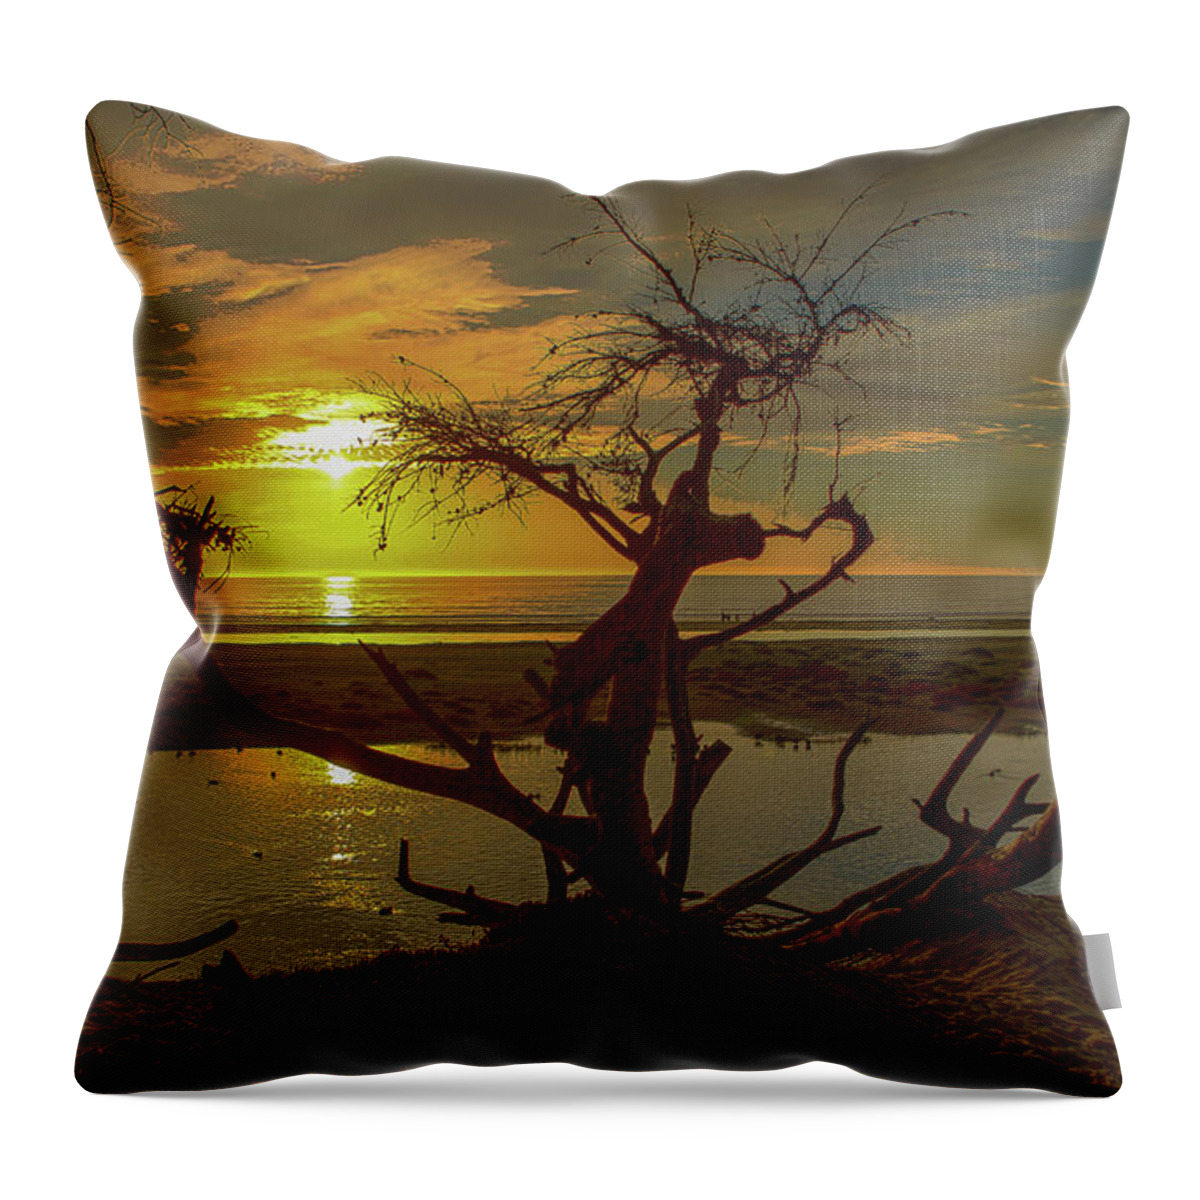 Pismo Throw Pillow featuring the photograph Pismo Sunset by Jeff Kurtz